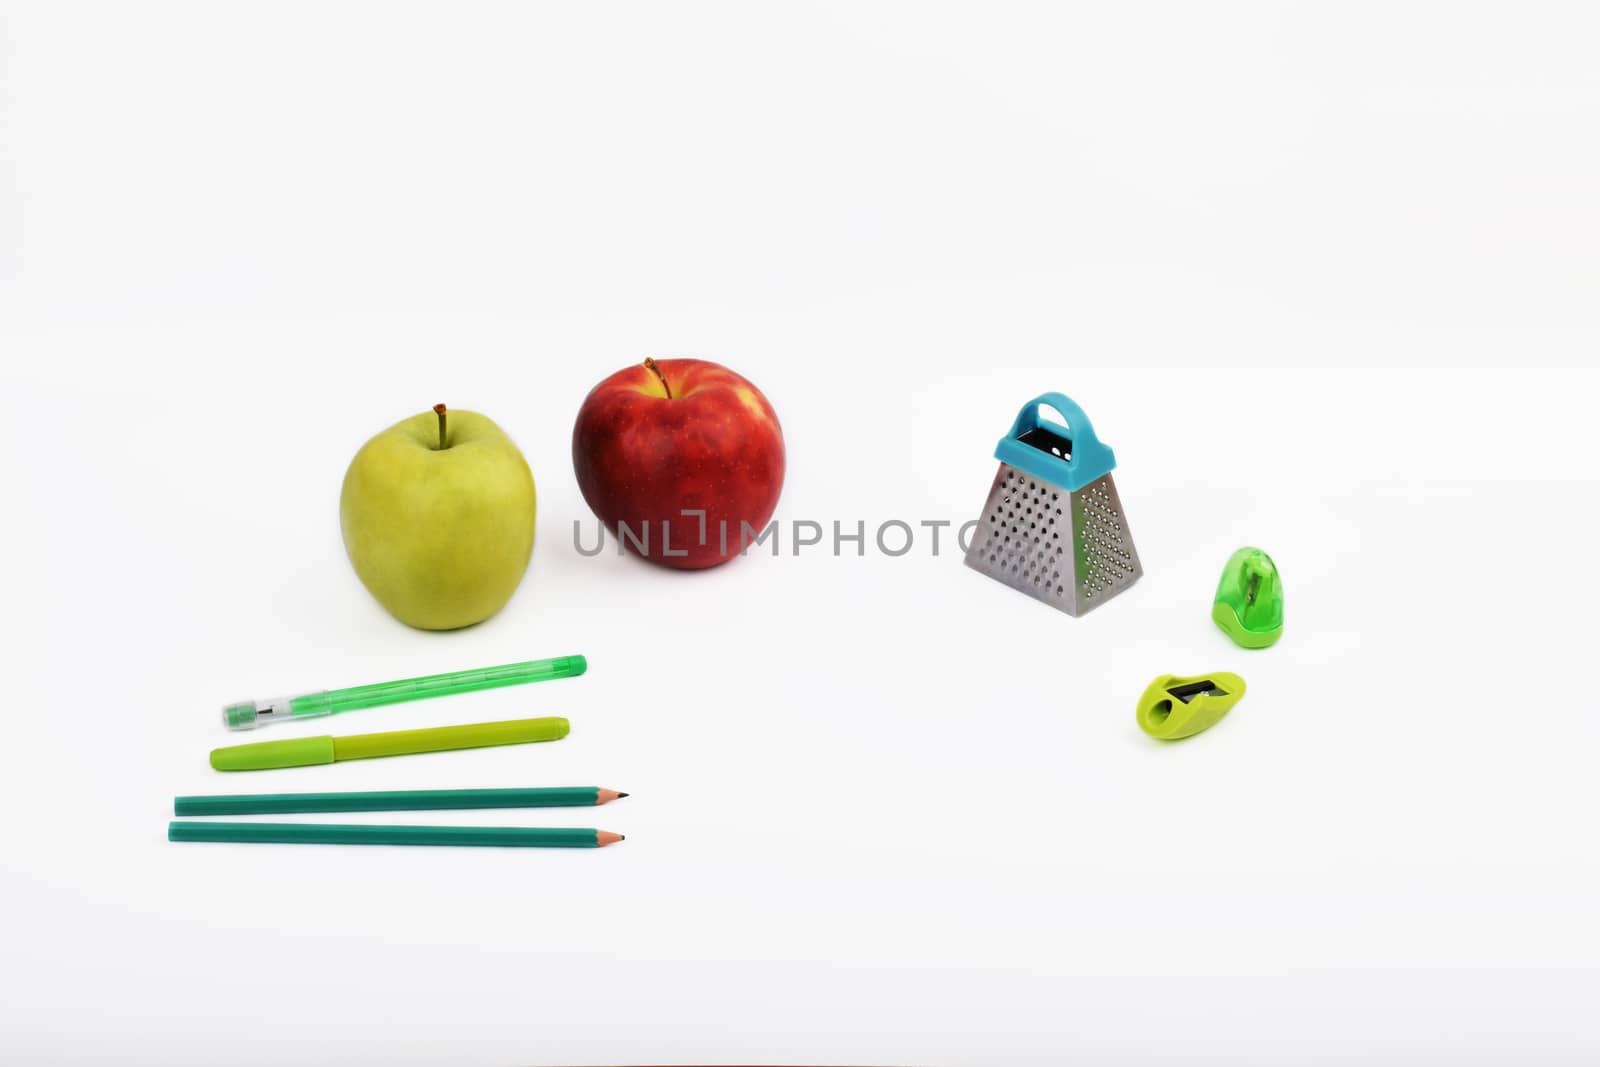 Mock up objects on the white background, front view